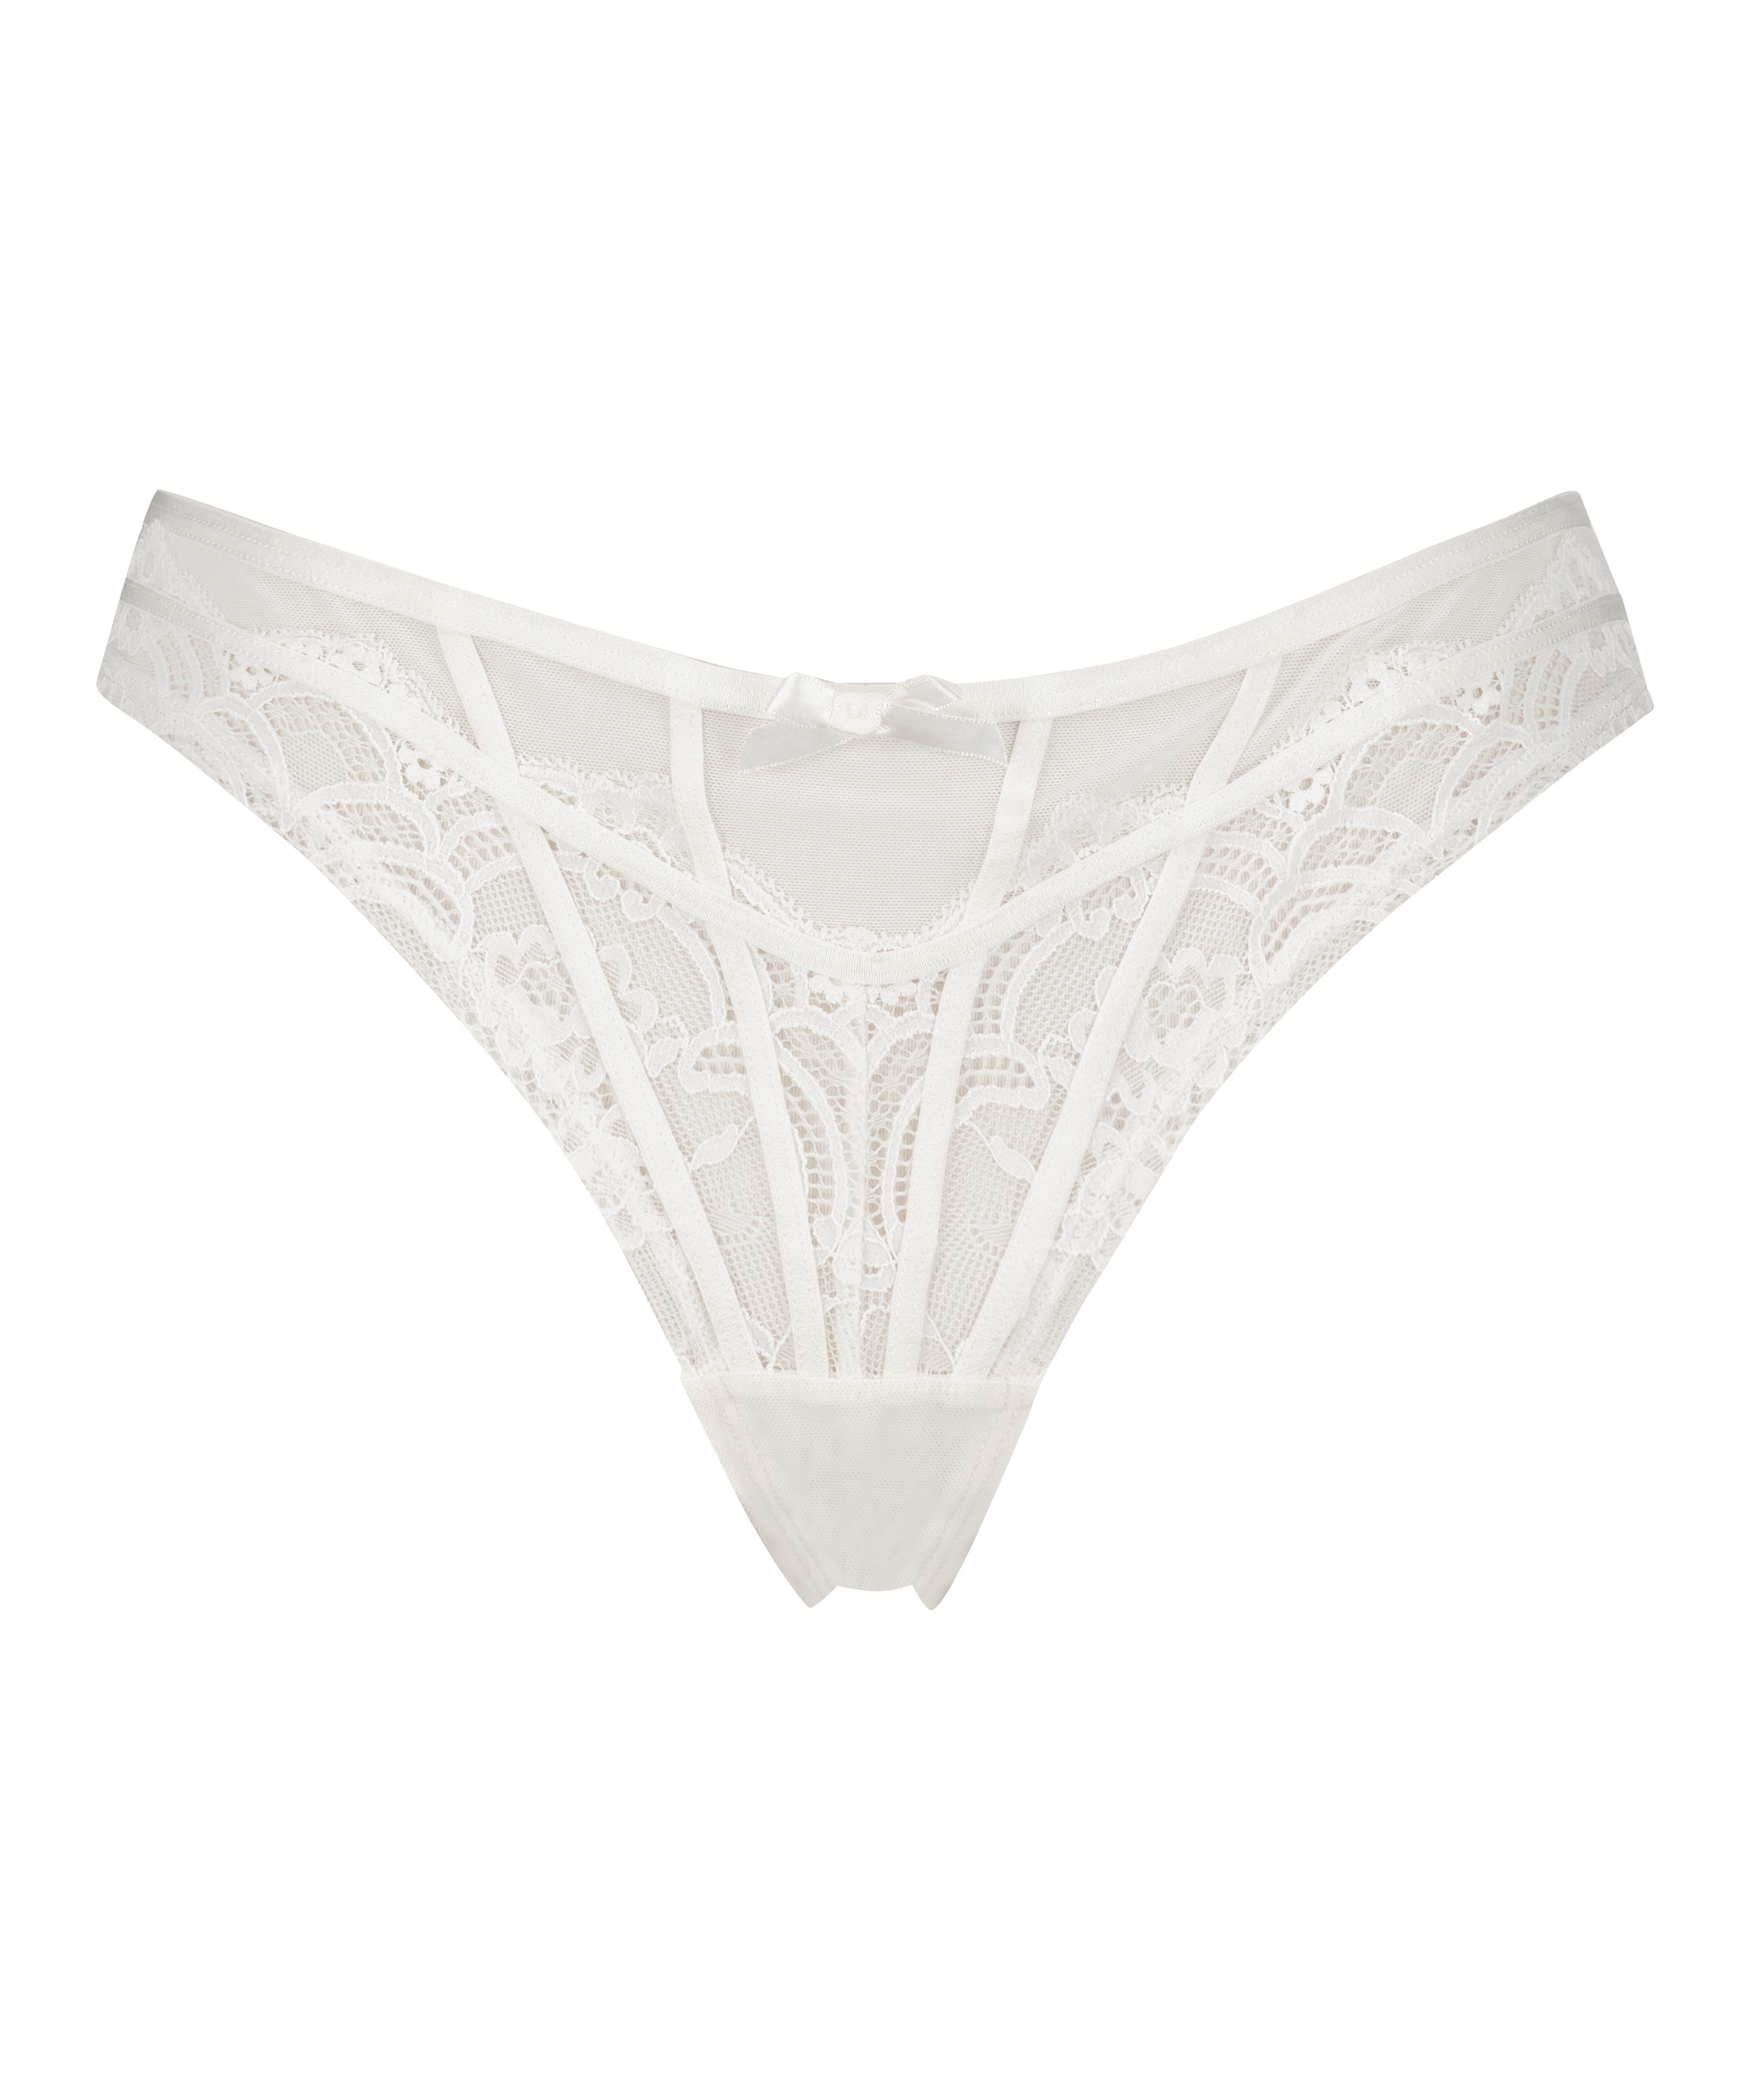 Buy White Lace High Waist High Leg Knickers from Next Hungary